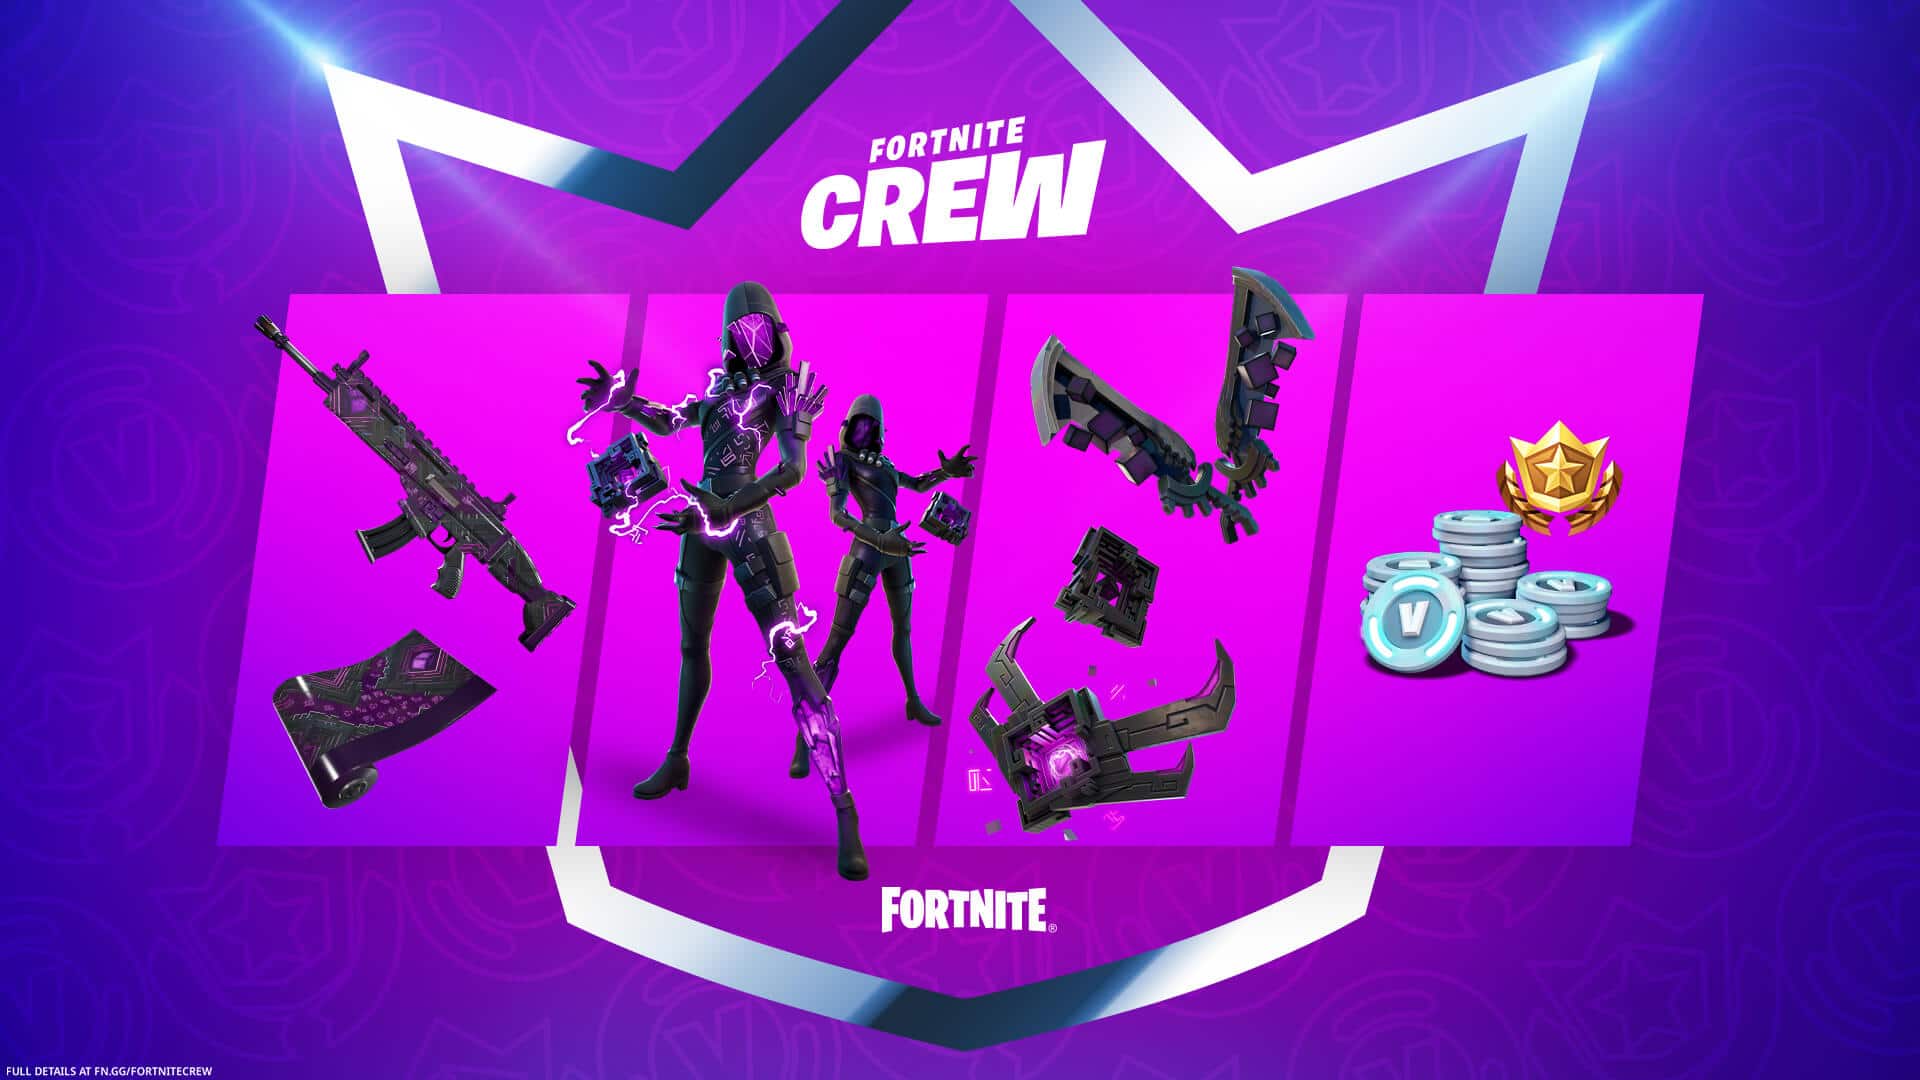 Fortnite Crew December - The Cube Assassin outfit